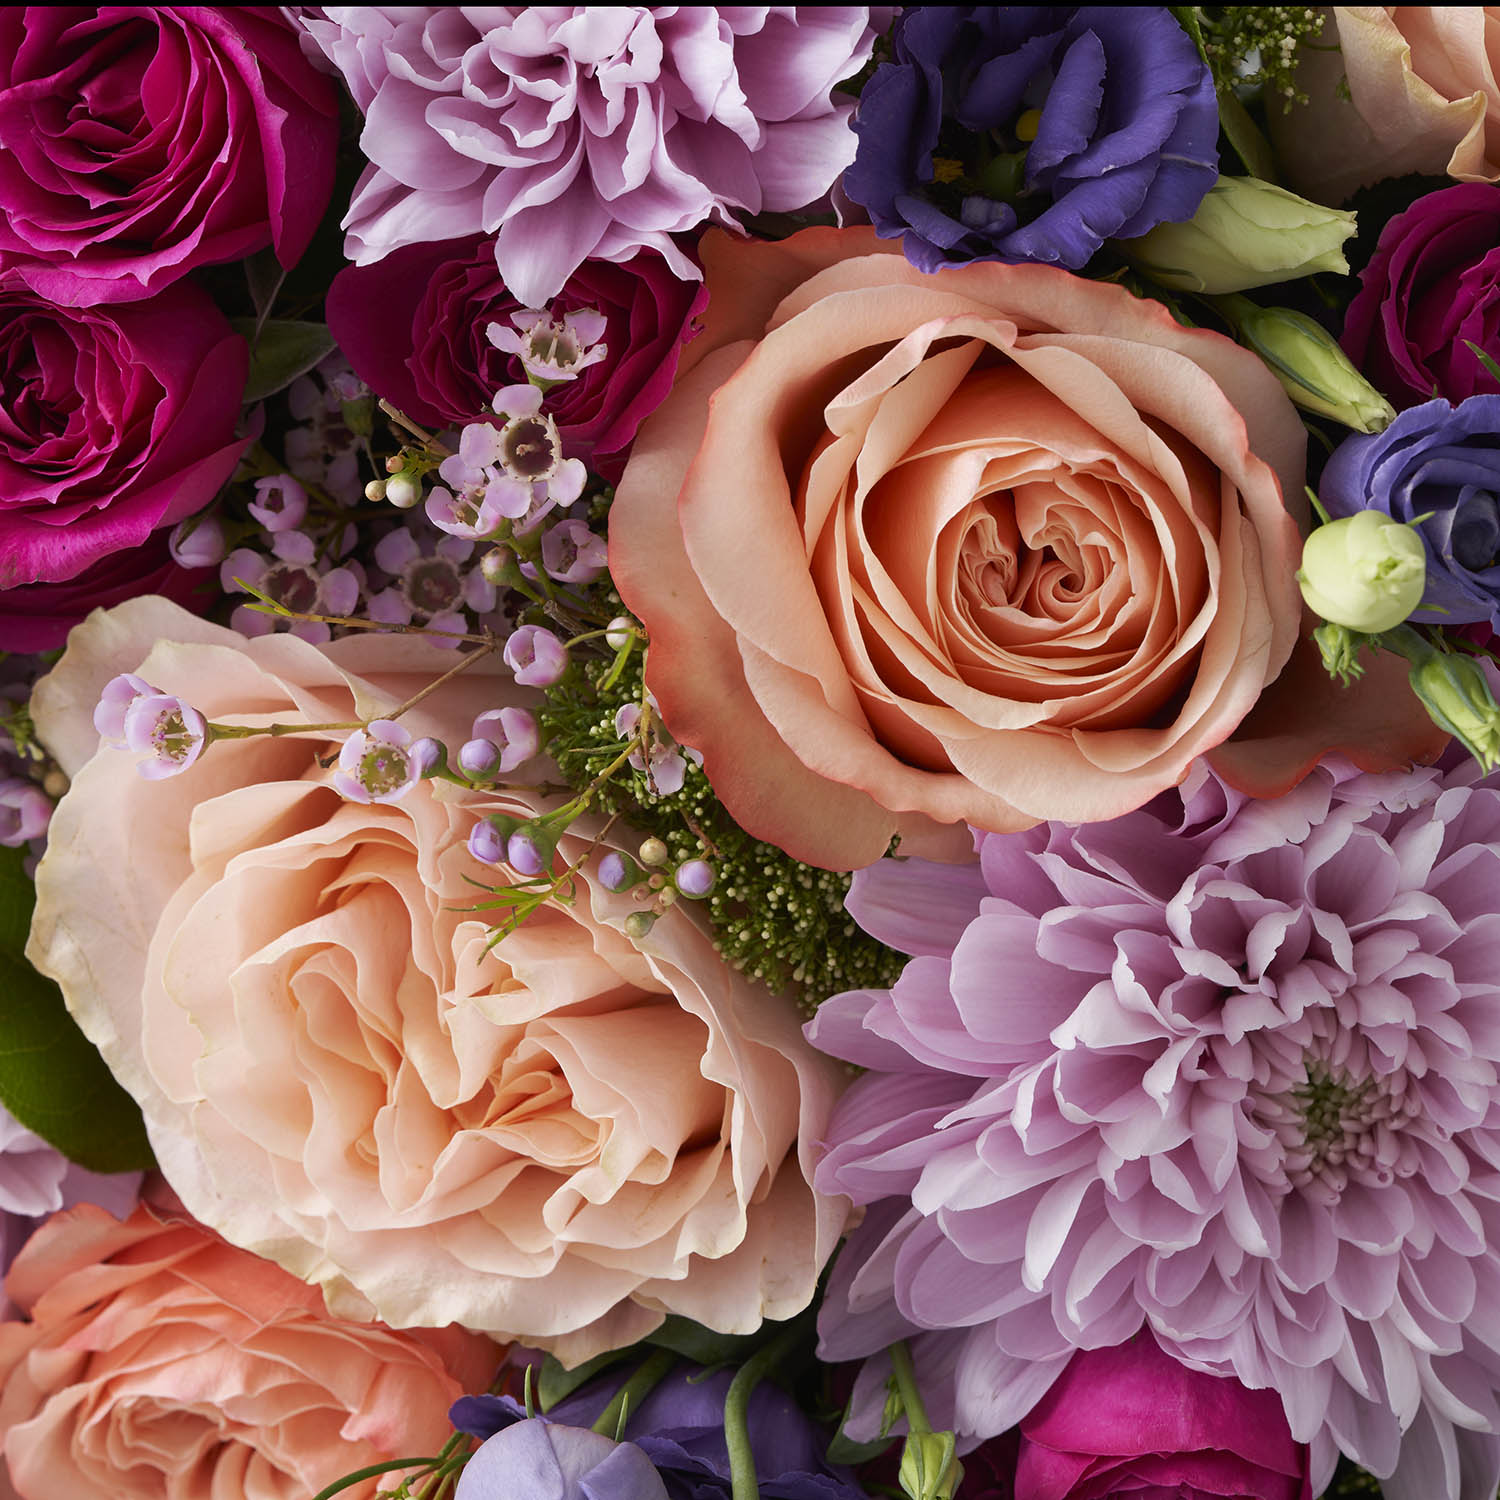 Closeup of lavender chrysanthemums, peach roses, fuchsia spray roses, pink was flower,  and purple lisianthus.